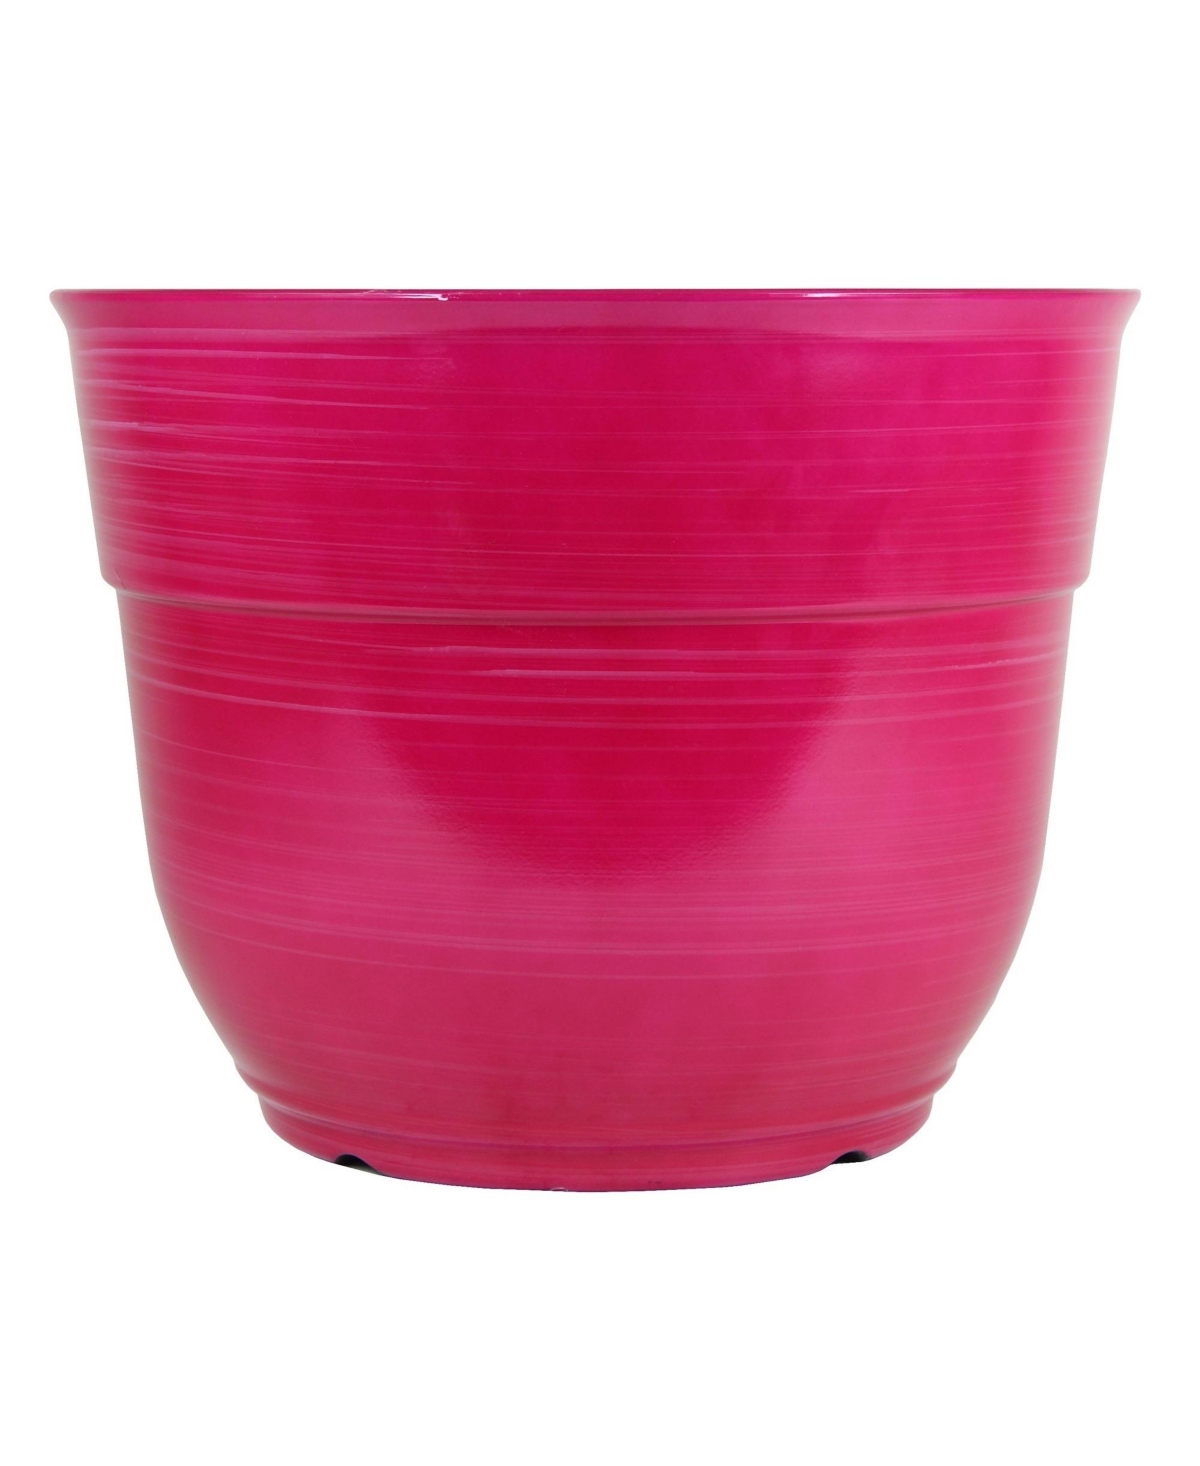 Glazed Brushed Happy Large Plastic Planter Bright Pink 15 Inch - Pink